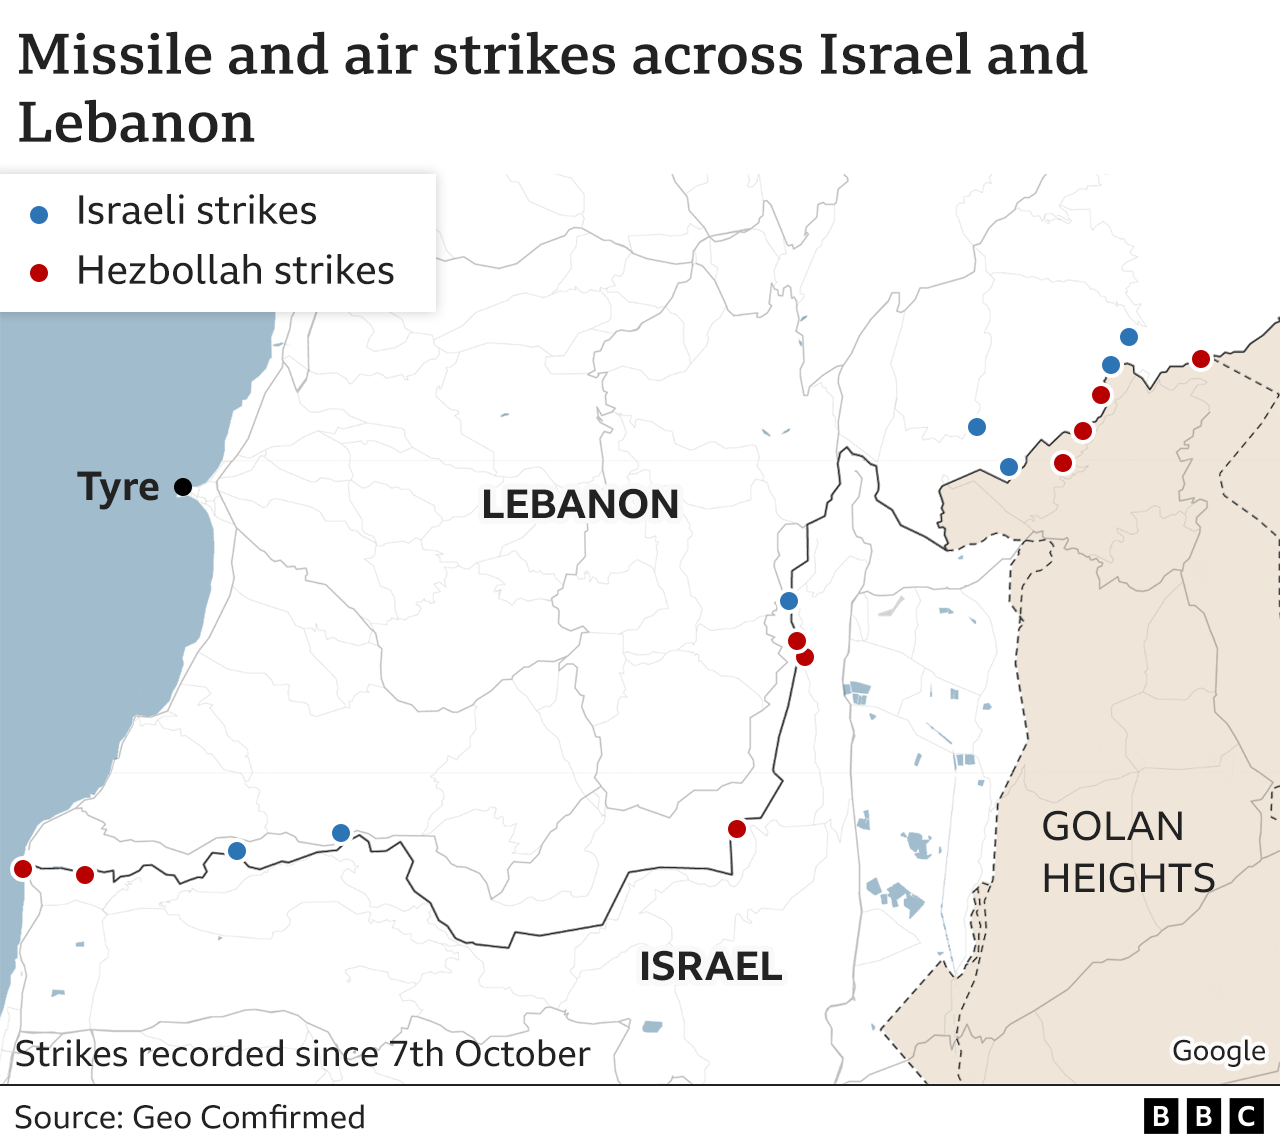 Map showing missile and air strikes across Israel and Lebanon